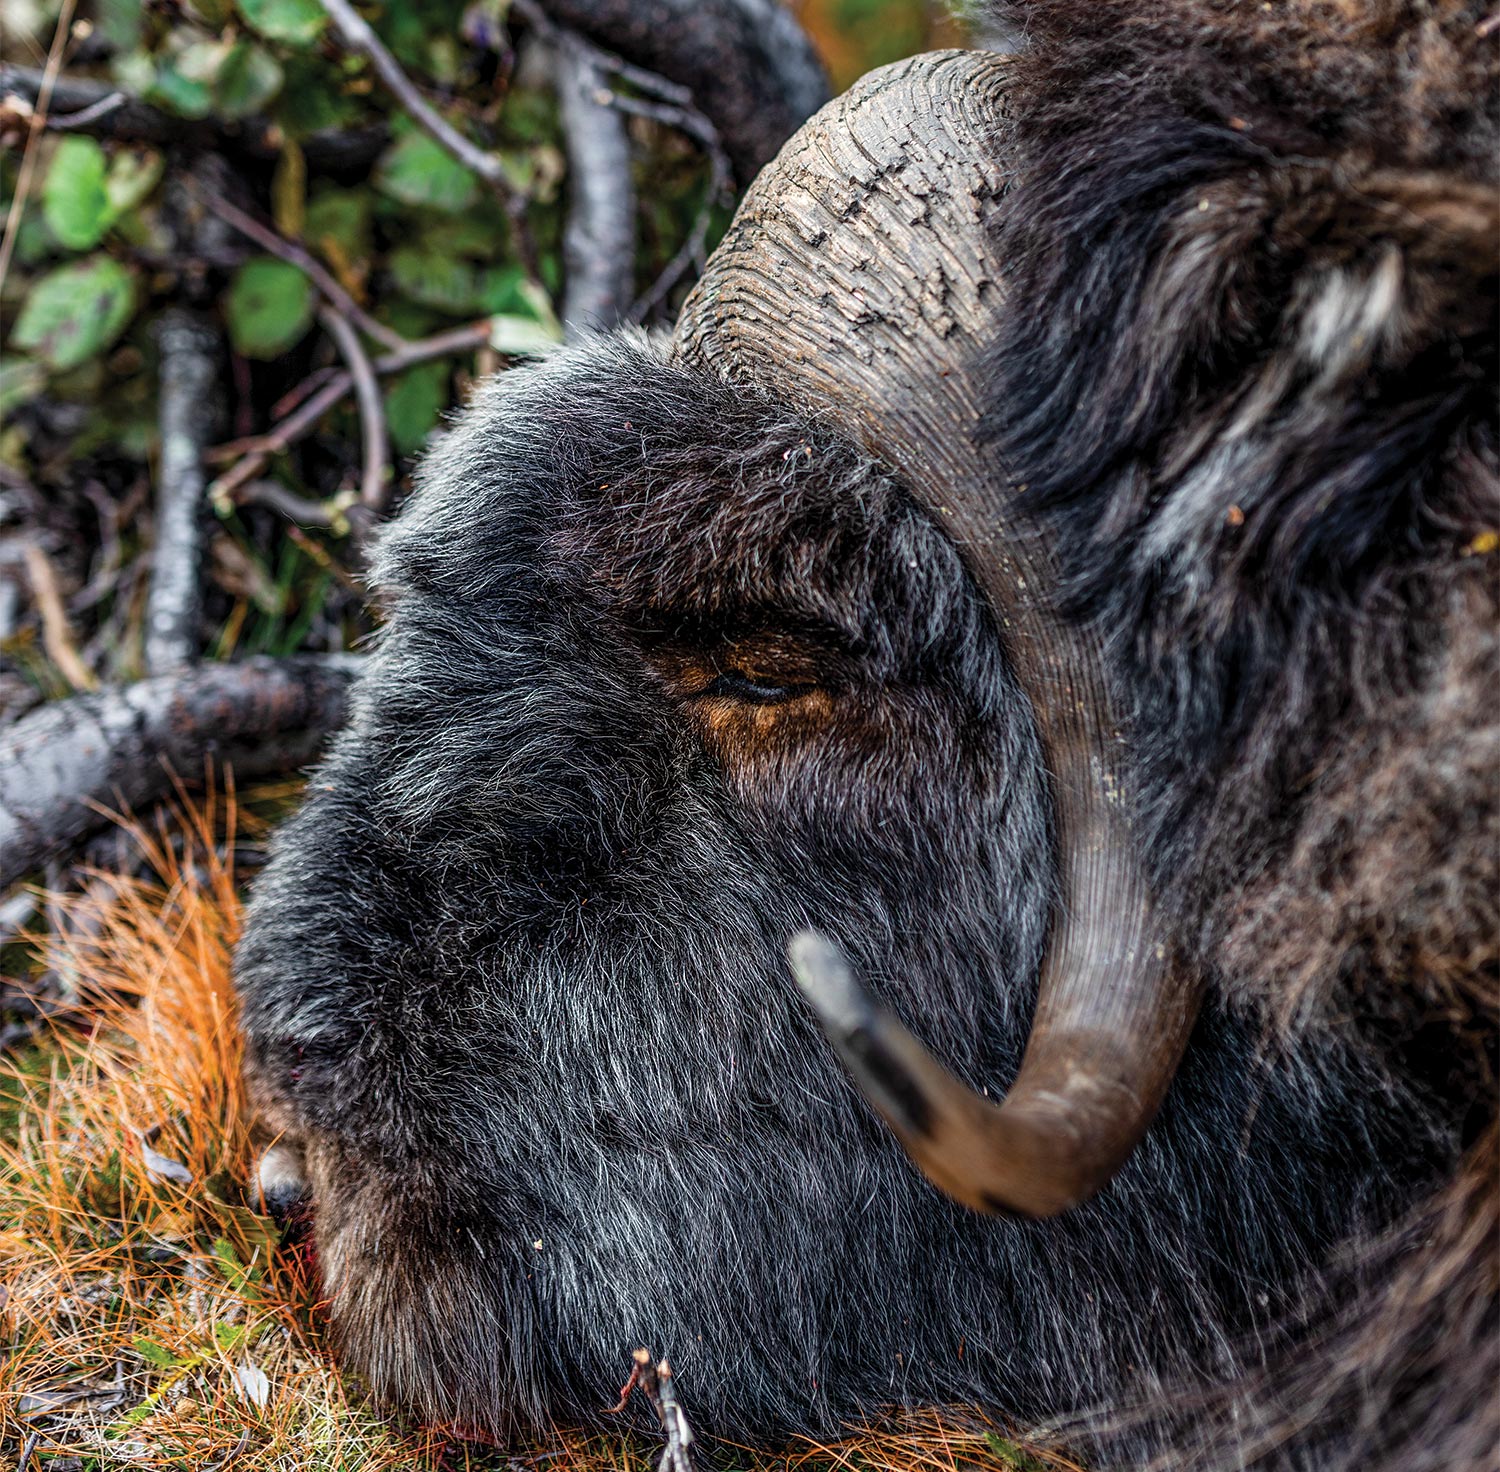 The curving horn of a musk ox.